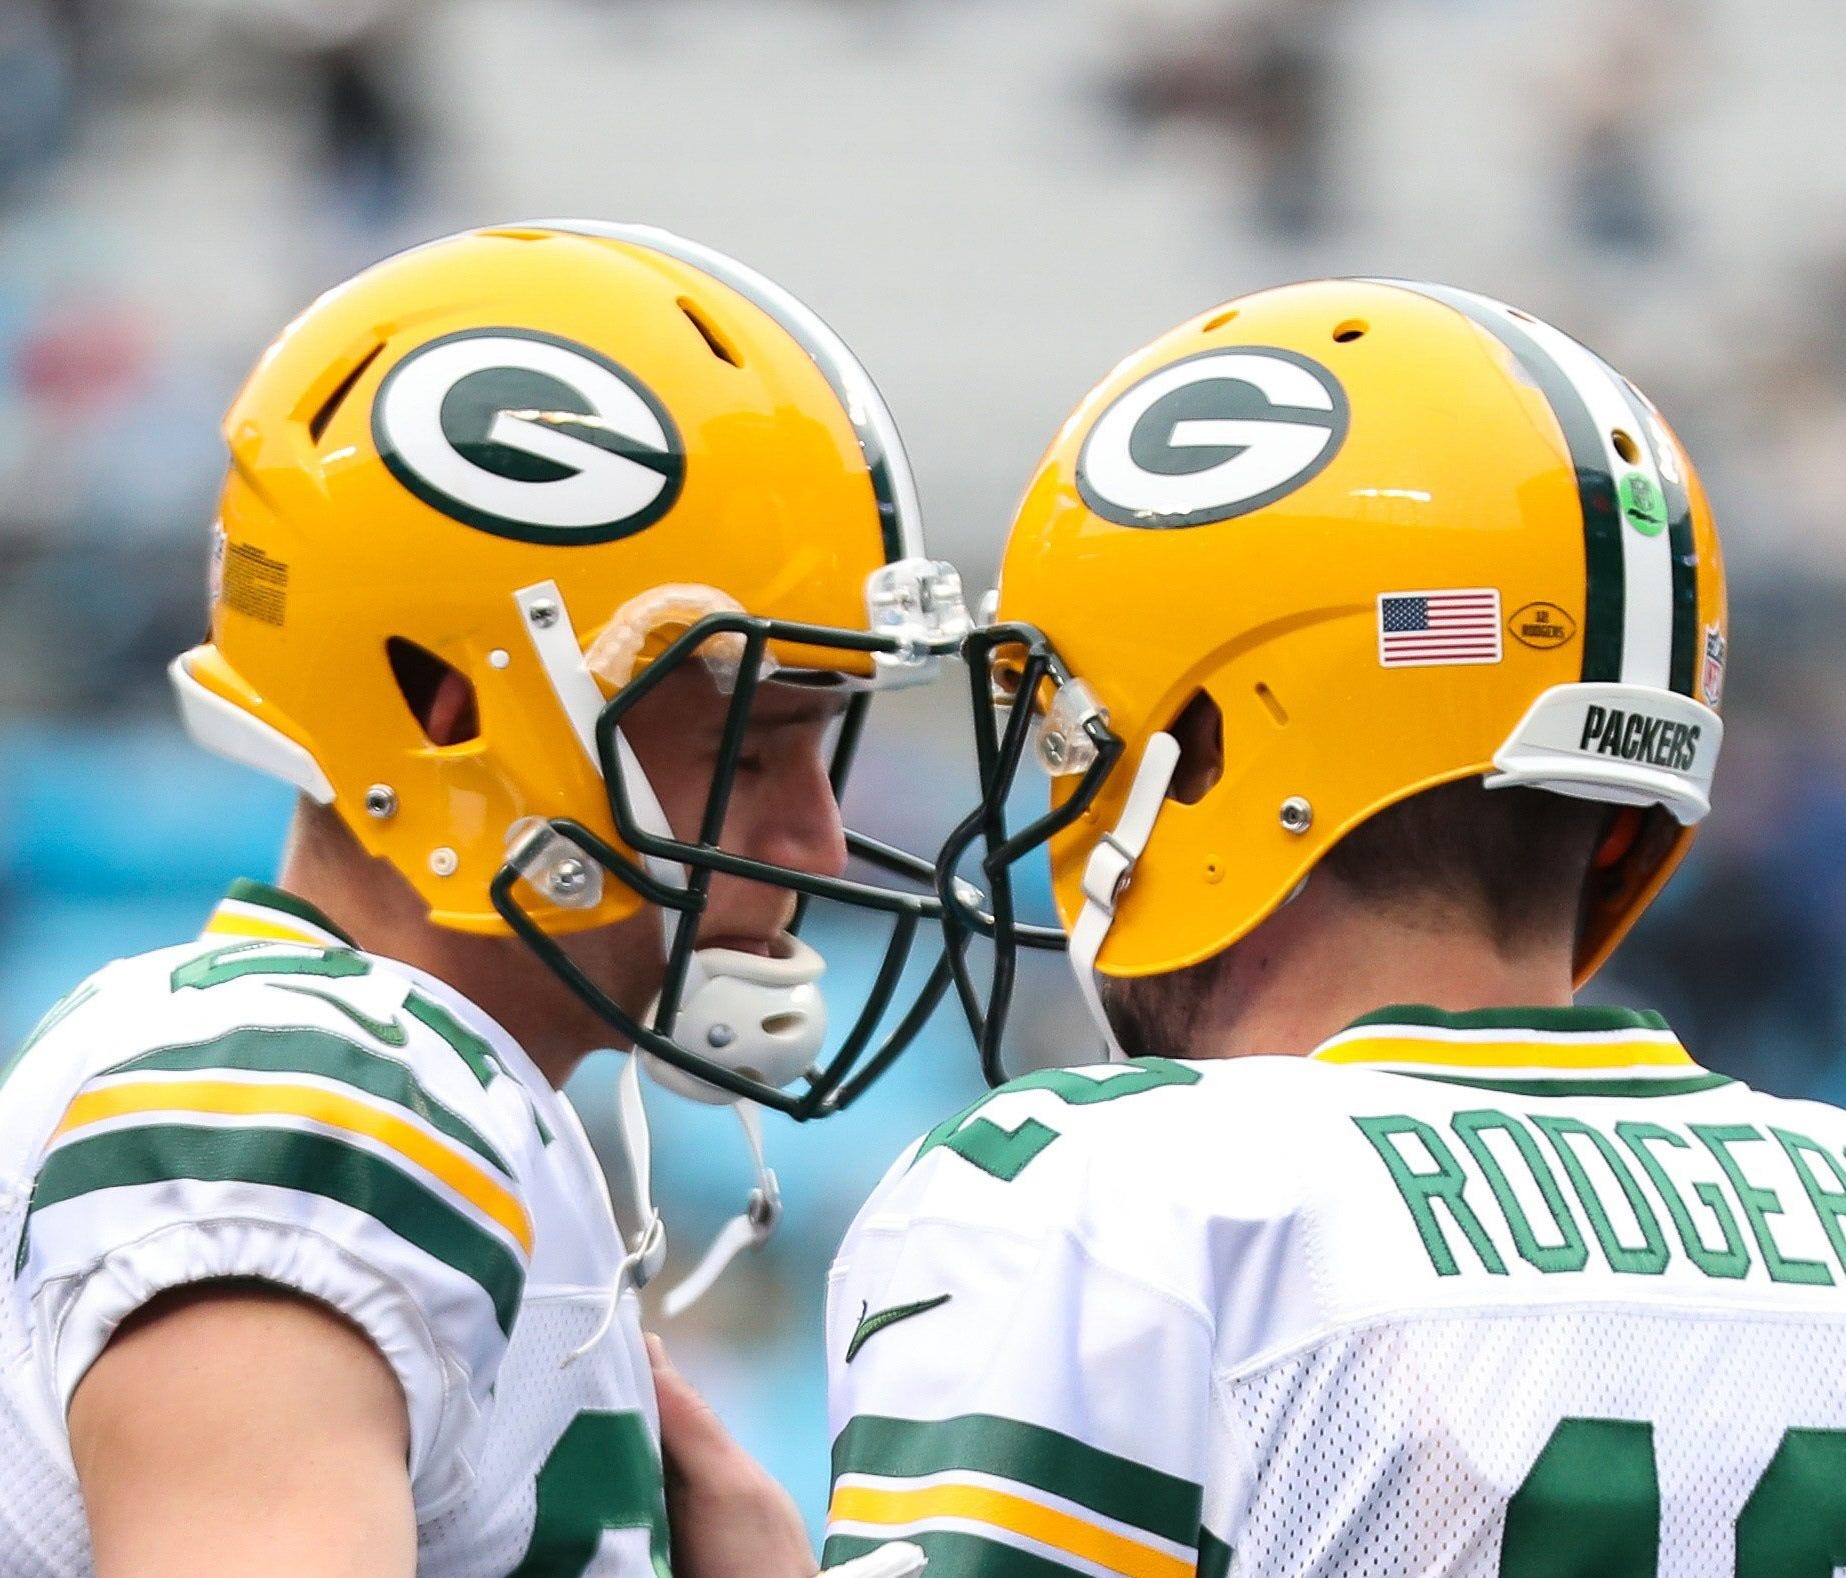 Dec 17, 2017; Charlotte, NC, USA; Green Bay Packers wide receiver Jordy Nelson (87) and Green Bay Packers quarterback Aaron Rodgers (12) talk in the end zone before the start of the first quarter against the Carolina Panthers at Bank of America Stadi